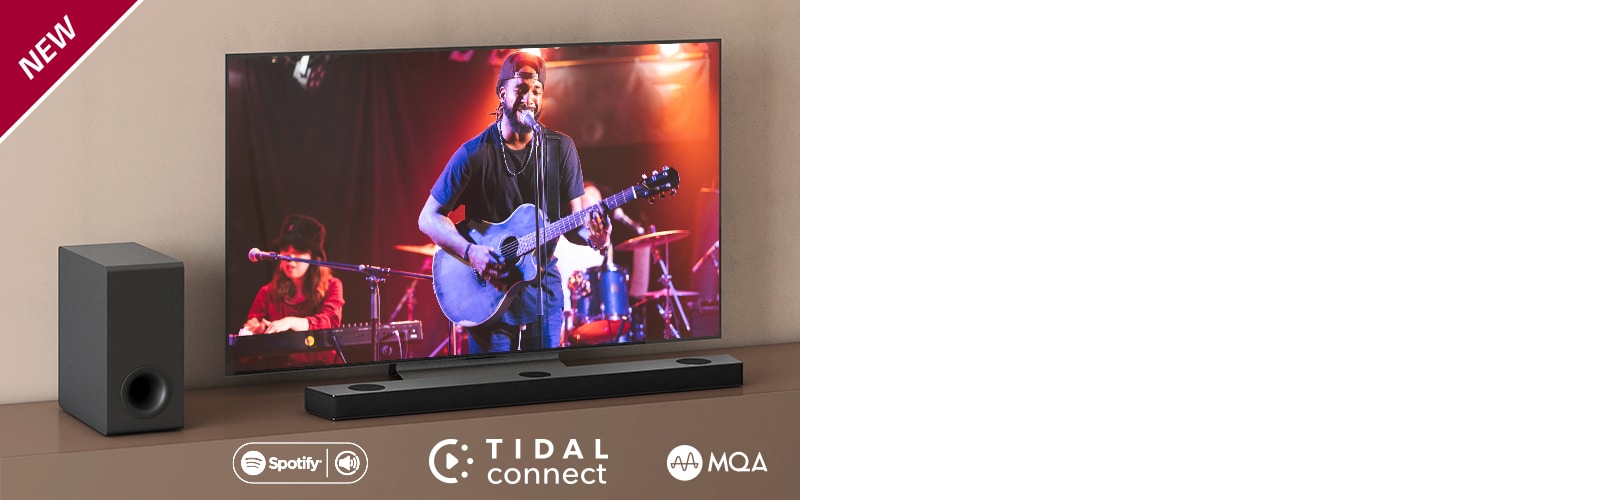 LG TV is placed on the brown shelf, LG Sound Bar S75Q is placed in front of the TV. Subwoofer is placed left side of the TV. TV shows a concerts scene. NEW mark is shown in the top left corner.